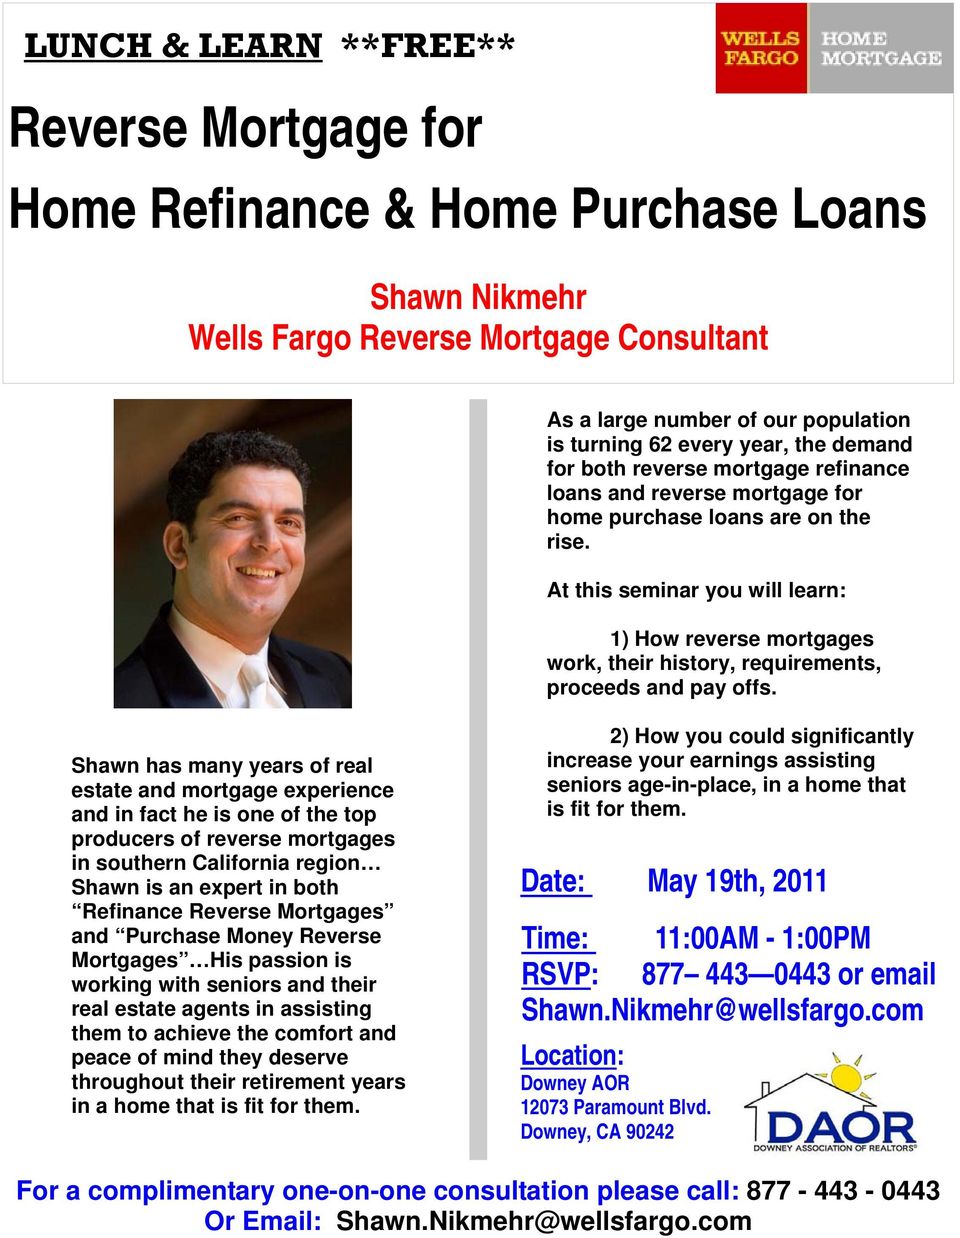 At this seminar you will learn: 1) How reverse mortgages work, their history, requirements, proceeds and pay offs.